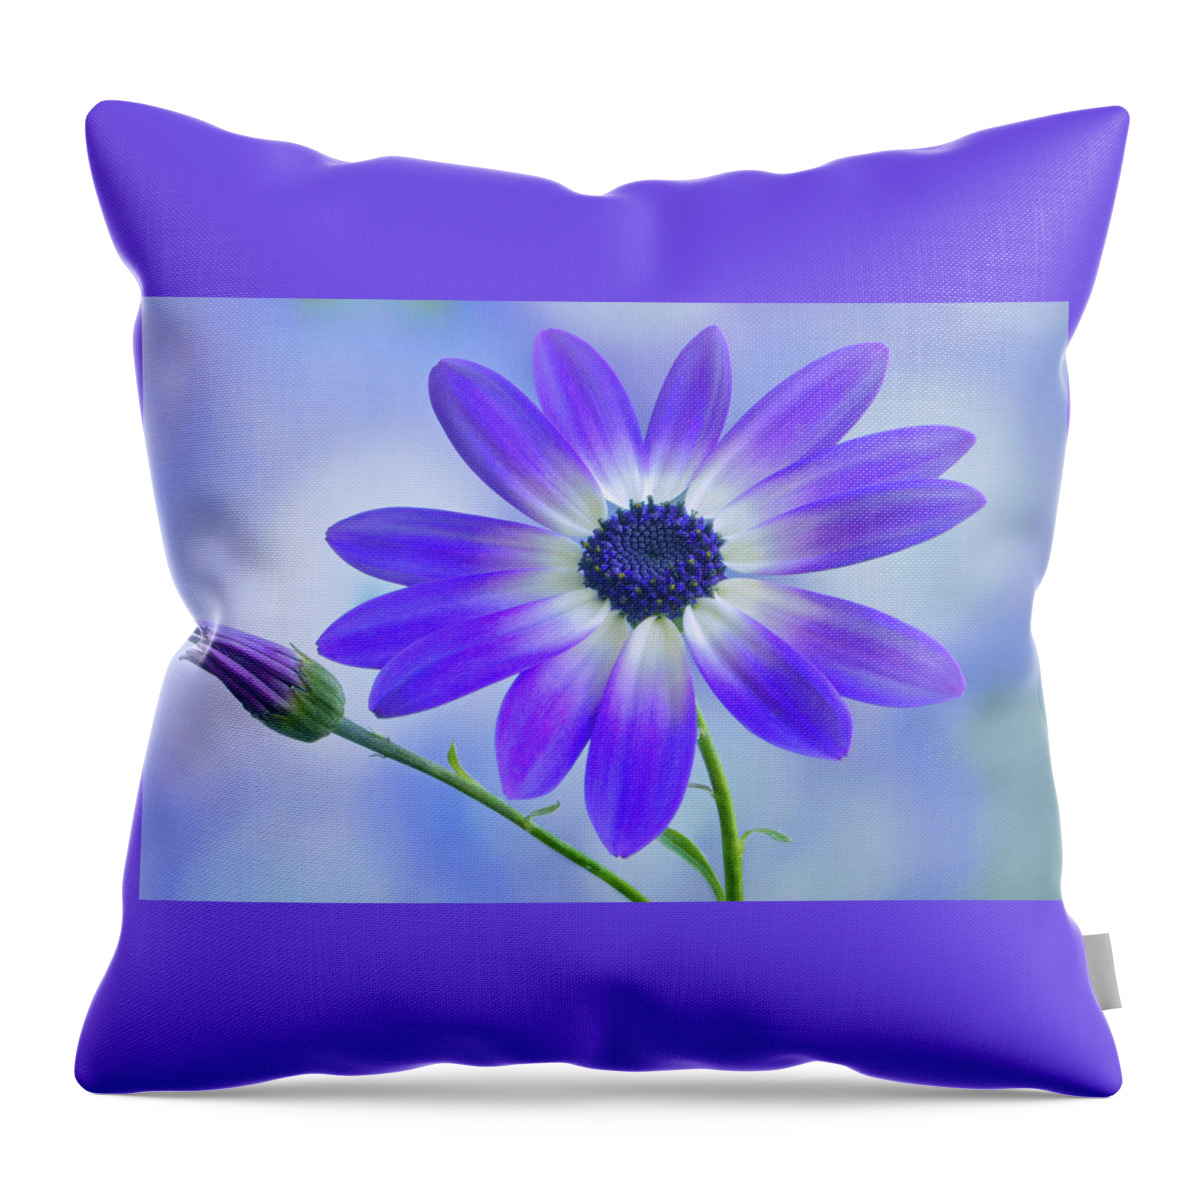 Senetti Throw Pillow featuring the photograph Classic Senetti by Terence Davis